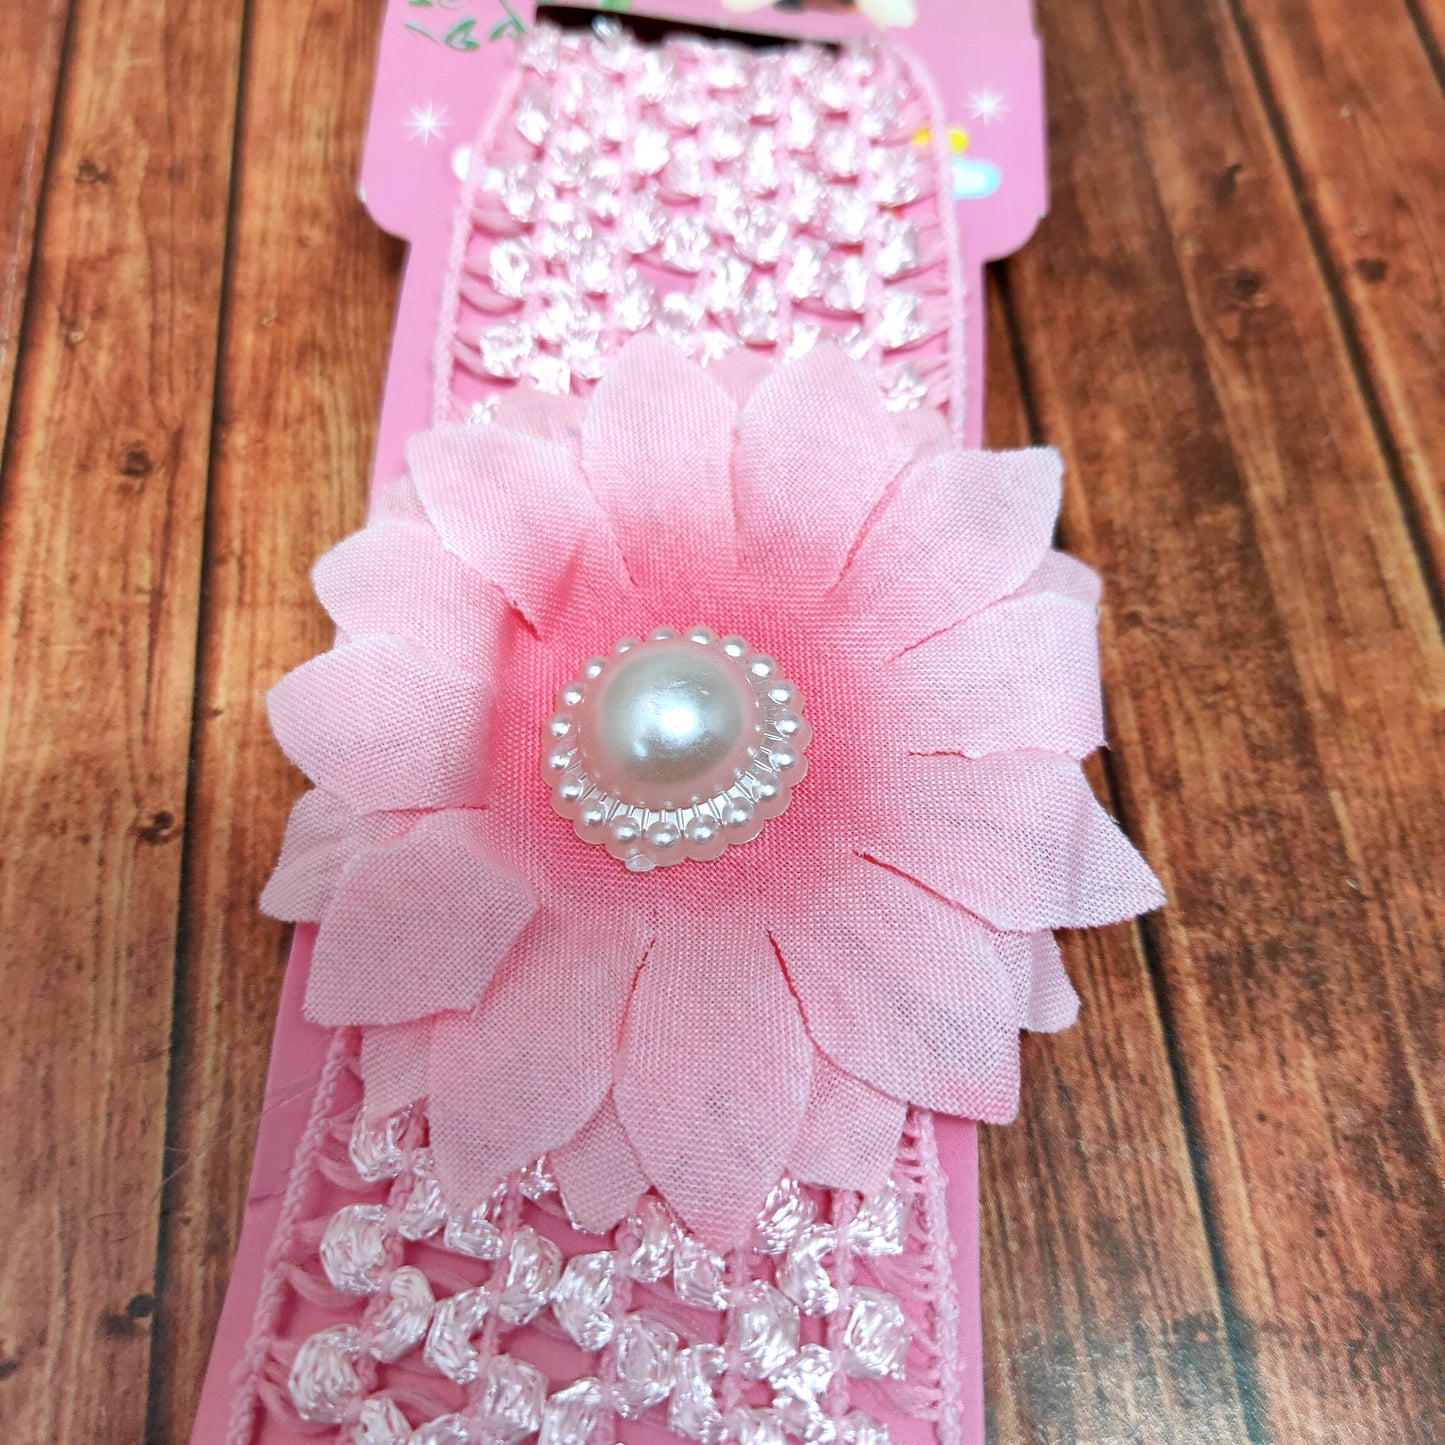 Floral Soft Stretchy Headbands for Baby Girls and Newborn (17-02 Baby Pink Baby Headband)